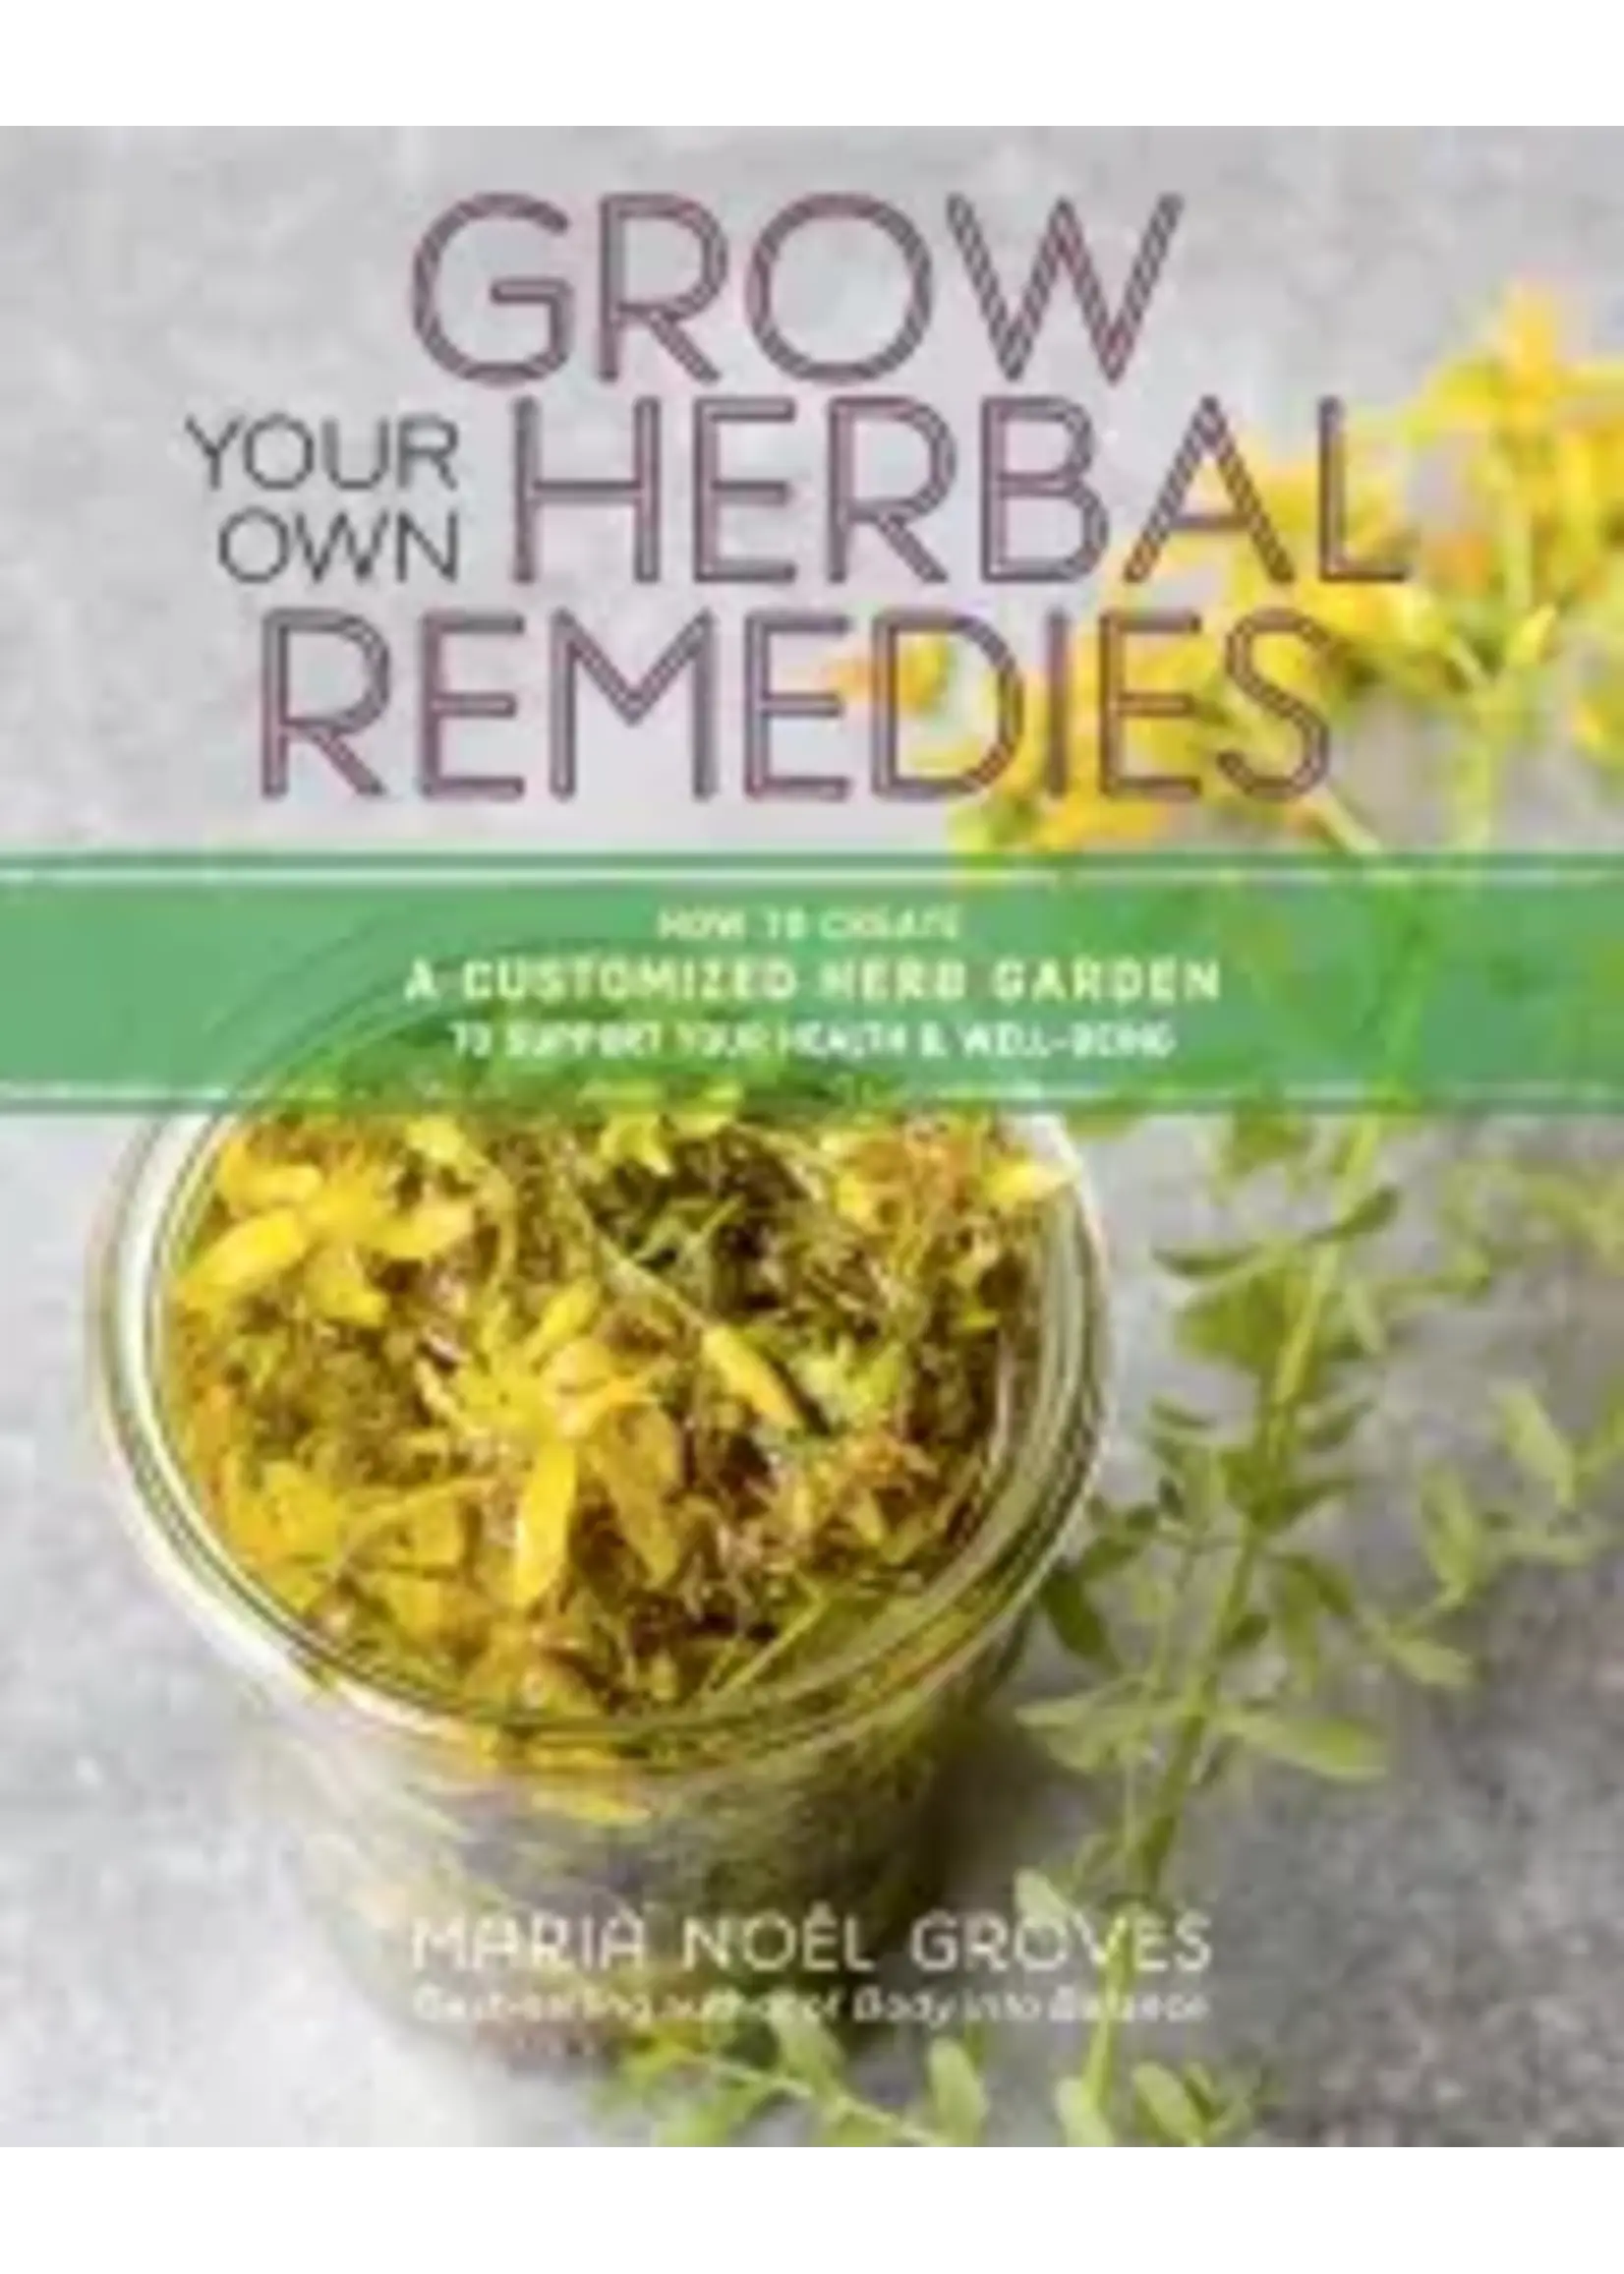 Grow Your Own Herbal Remedies